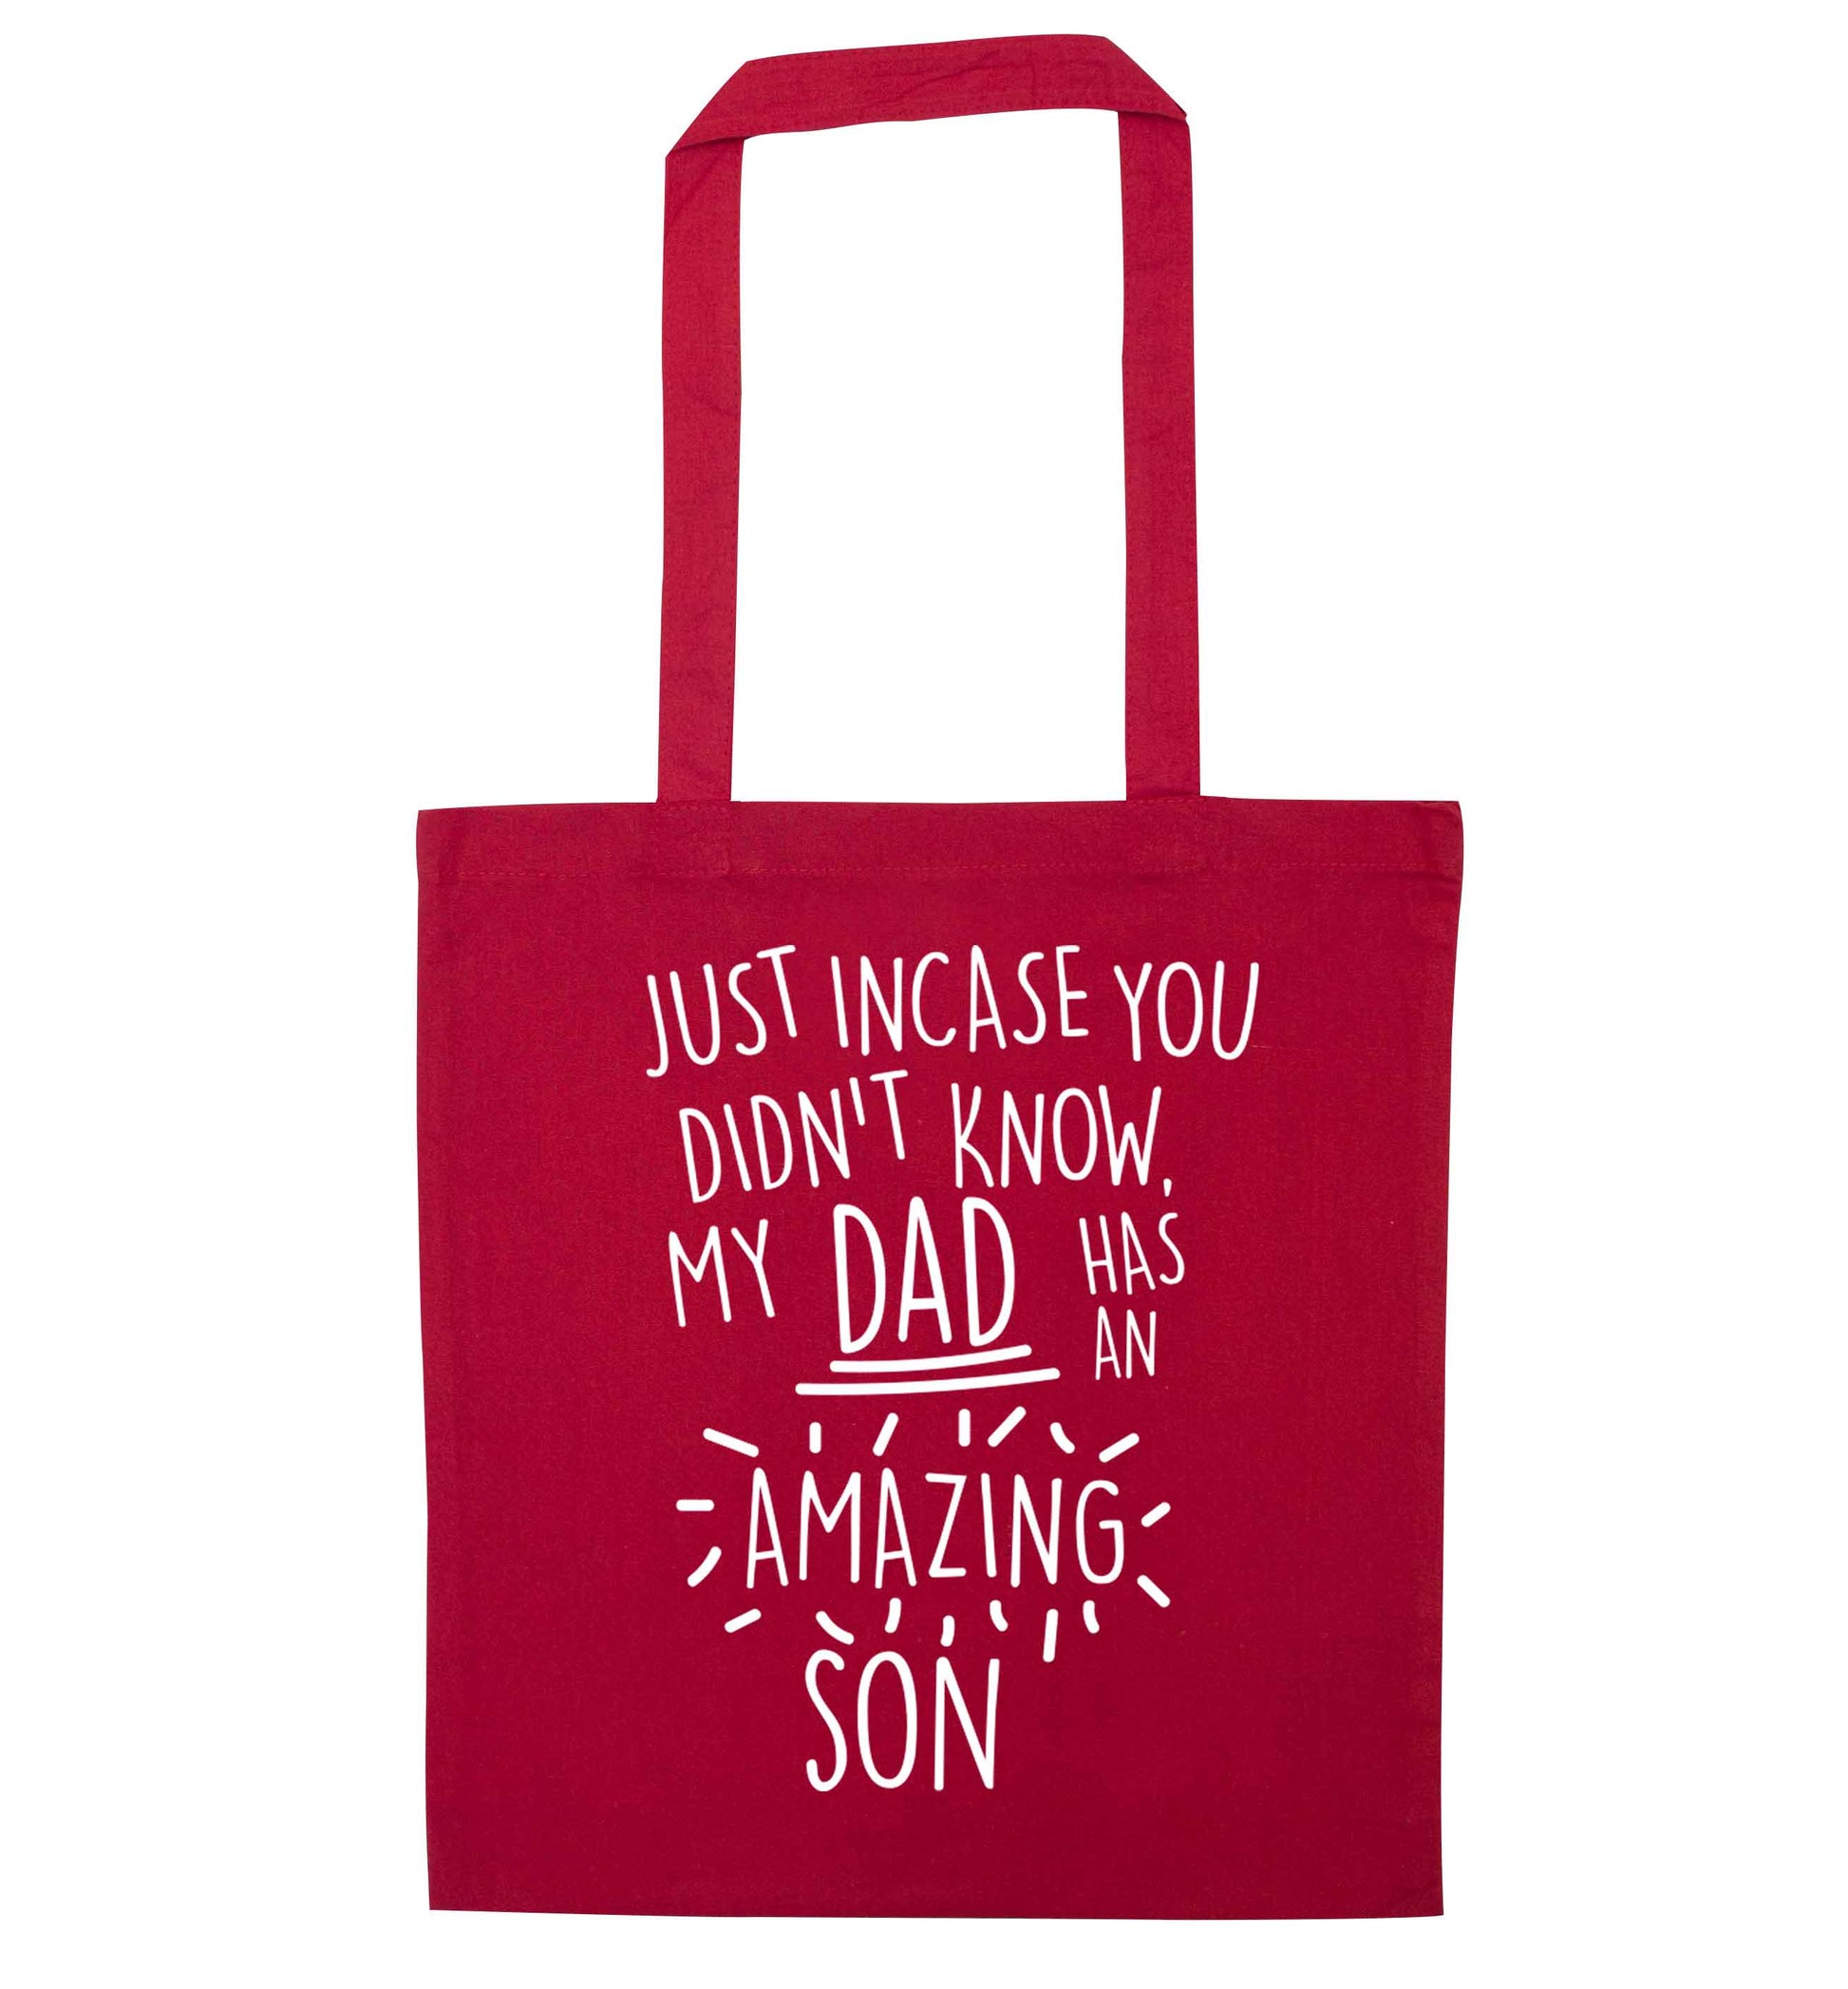 Just incase you didn't know my dad has an amazing son red tote bag